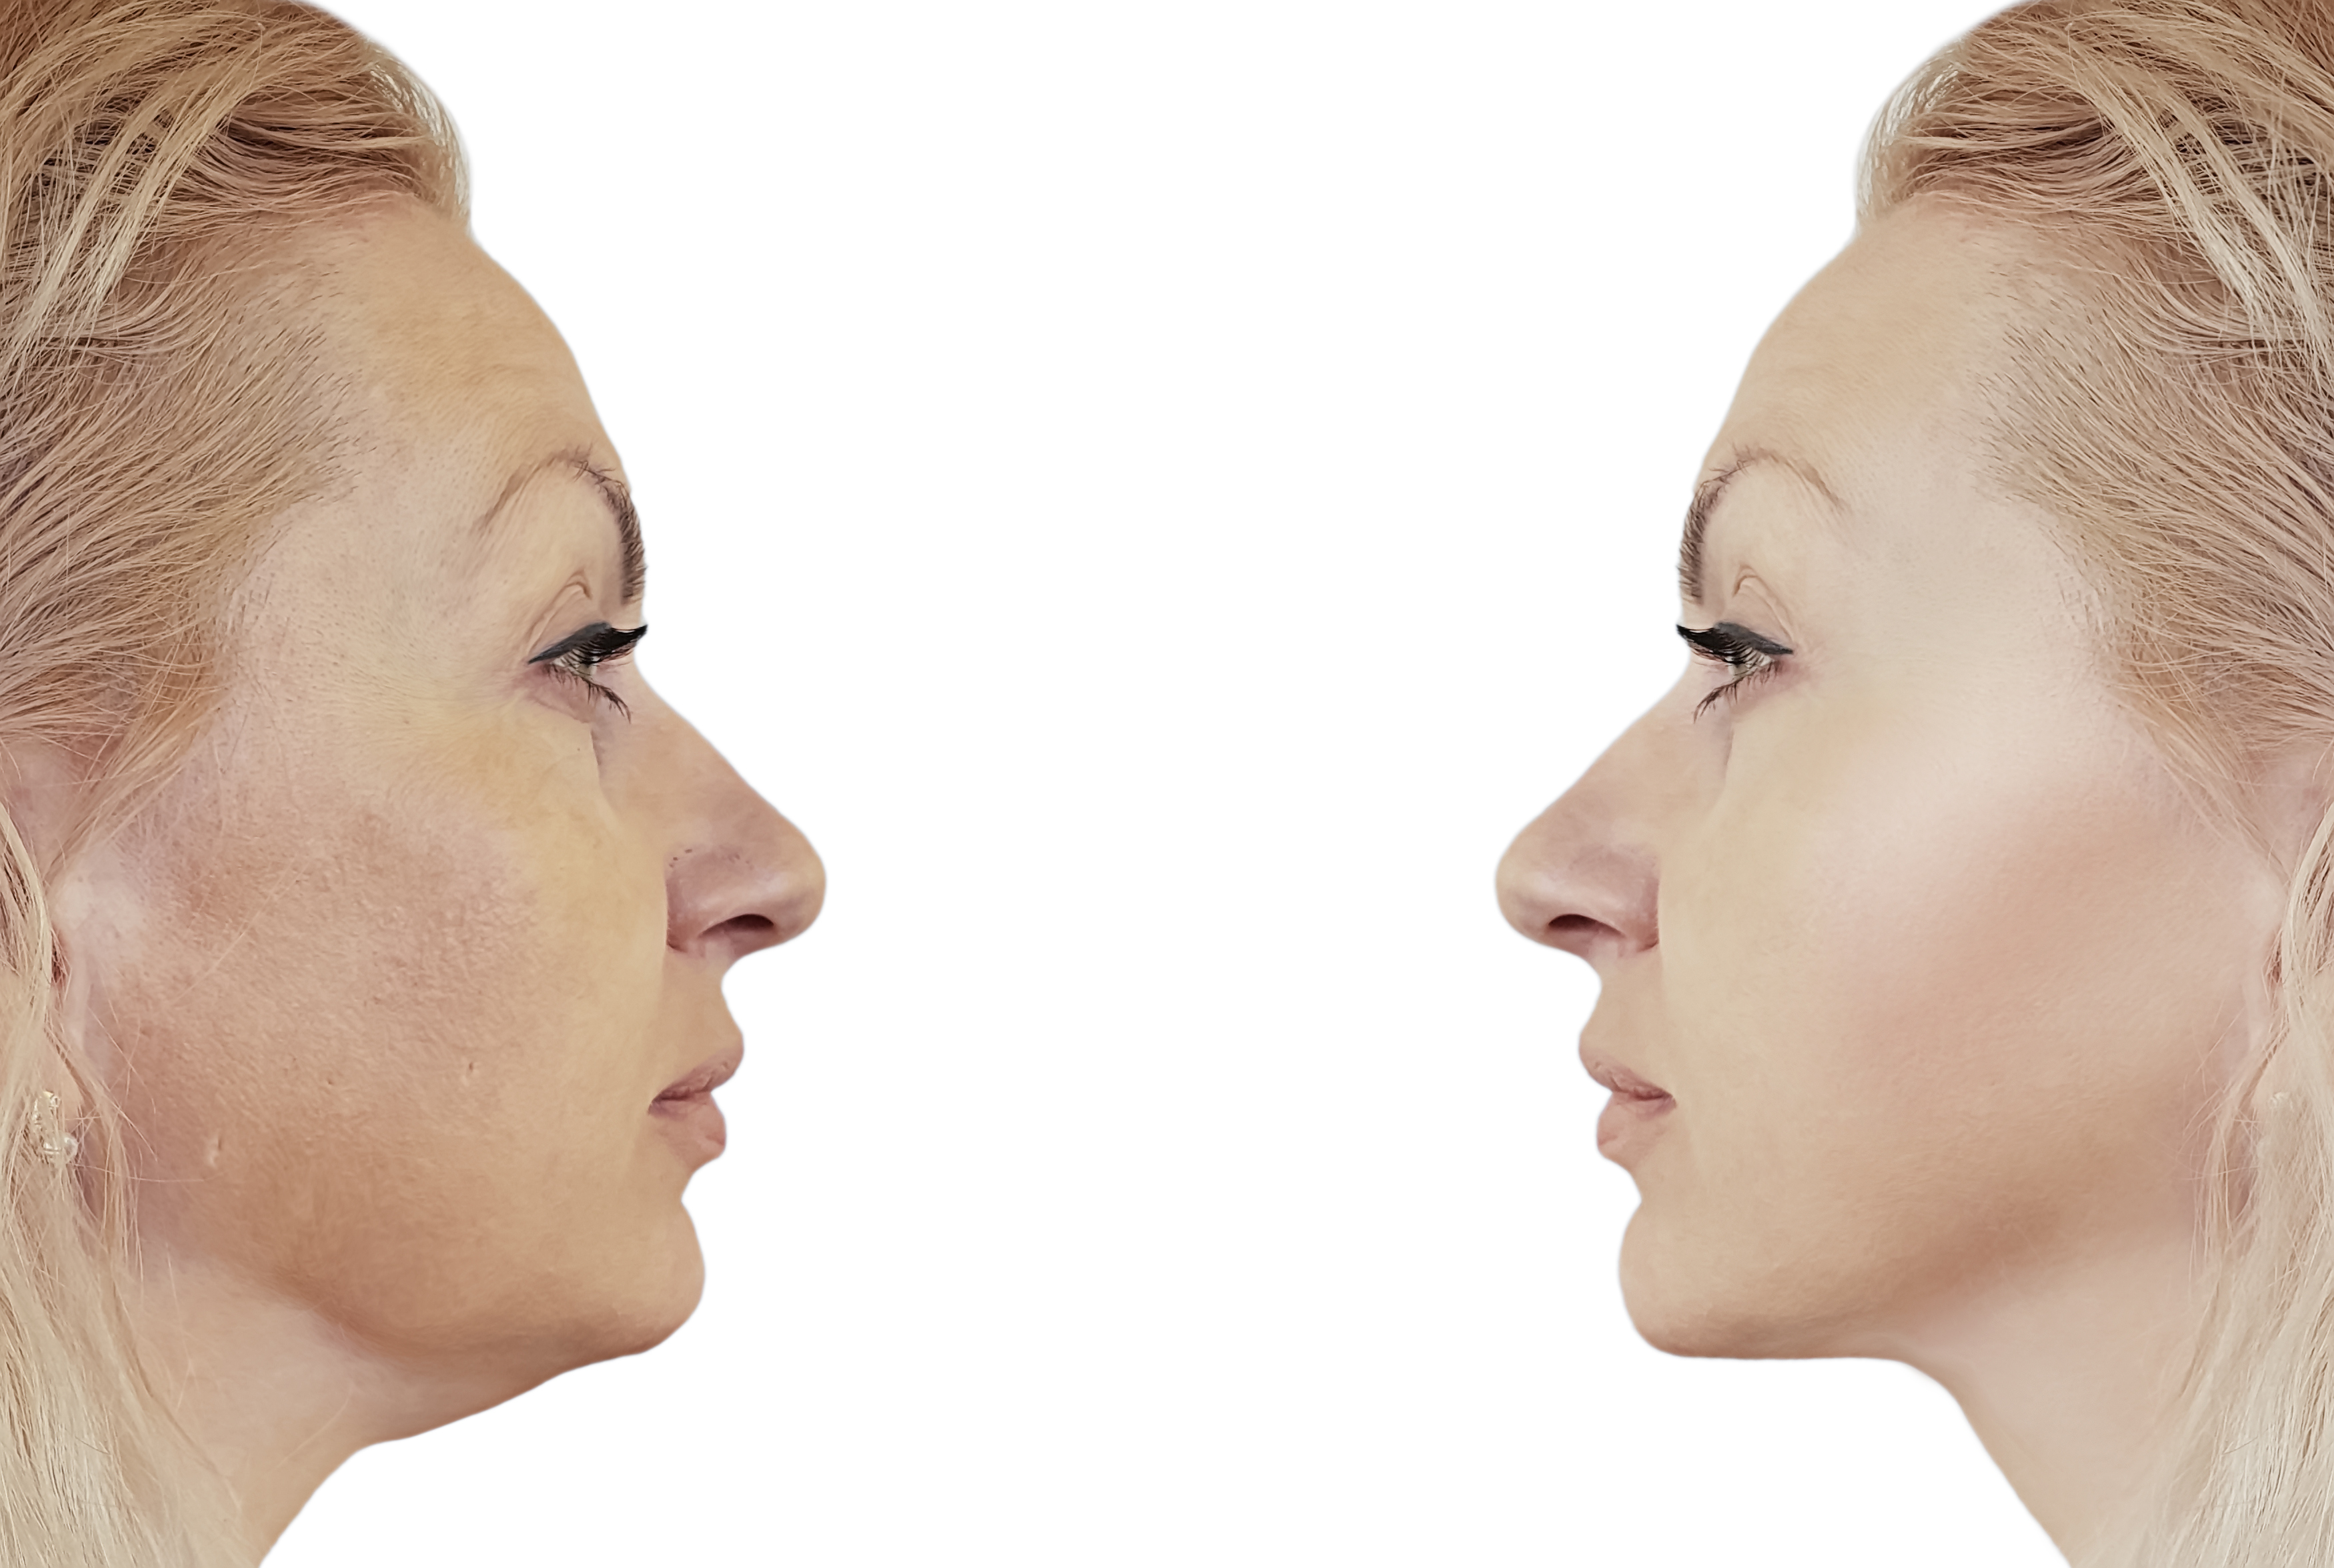 woman double chin before and after procedures, retouching